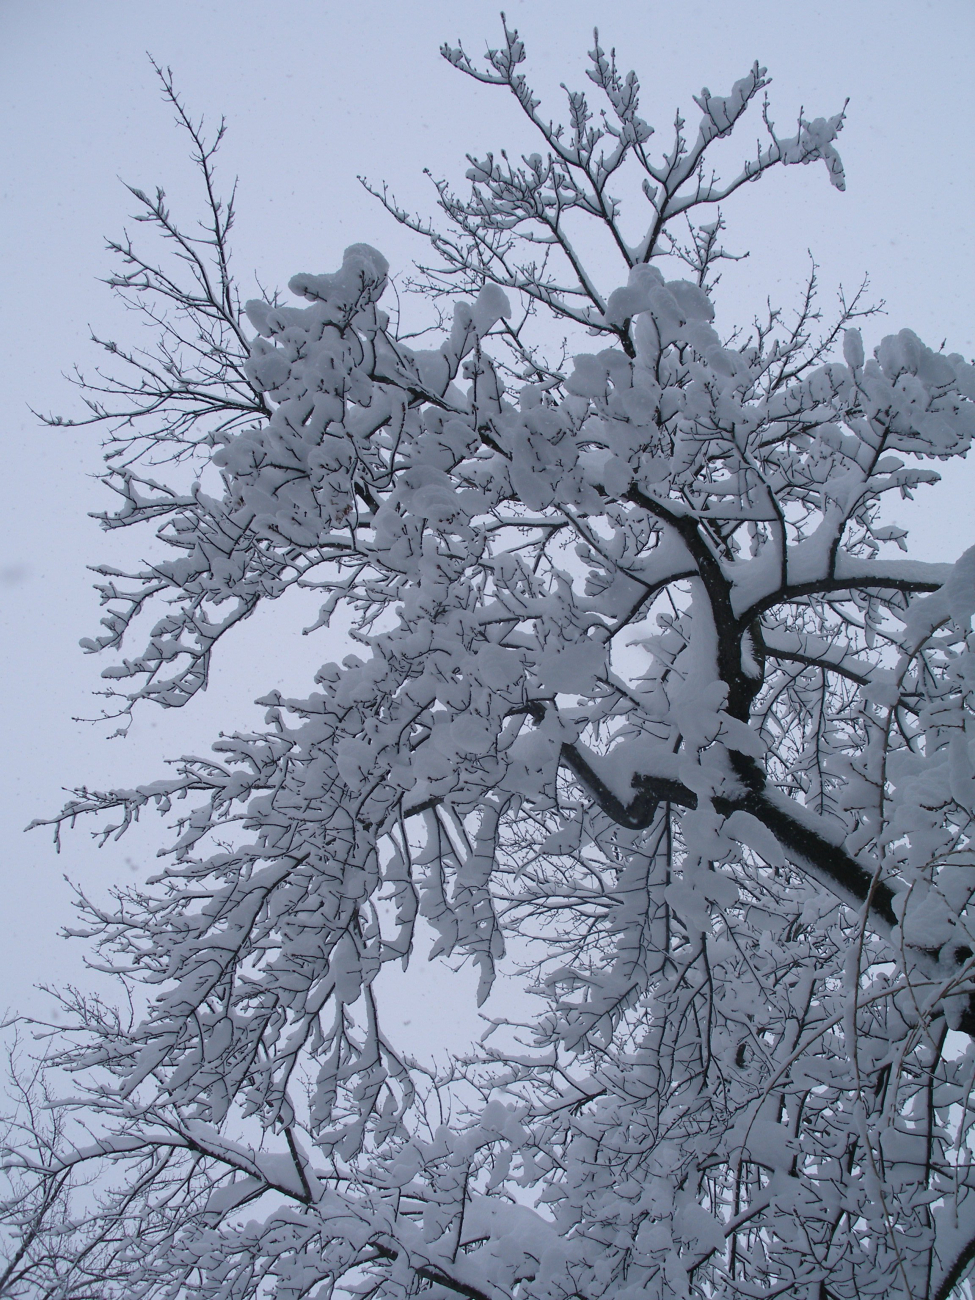 Trees covered with snow following second major snowstorm of 2009/2010 season